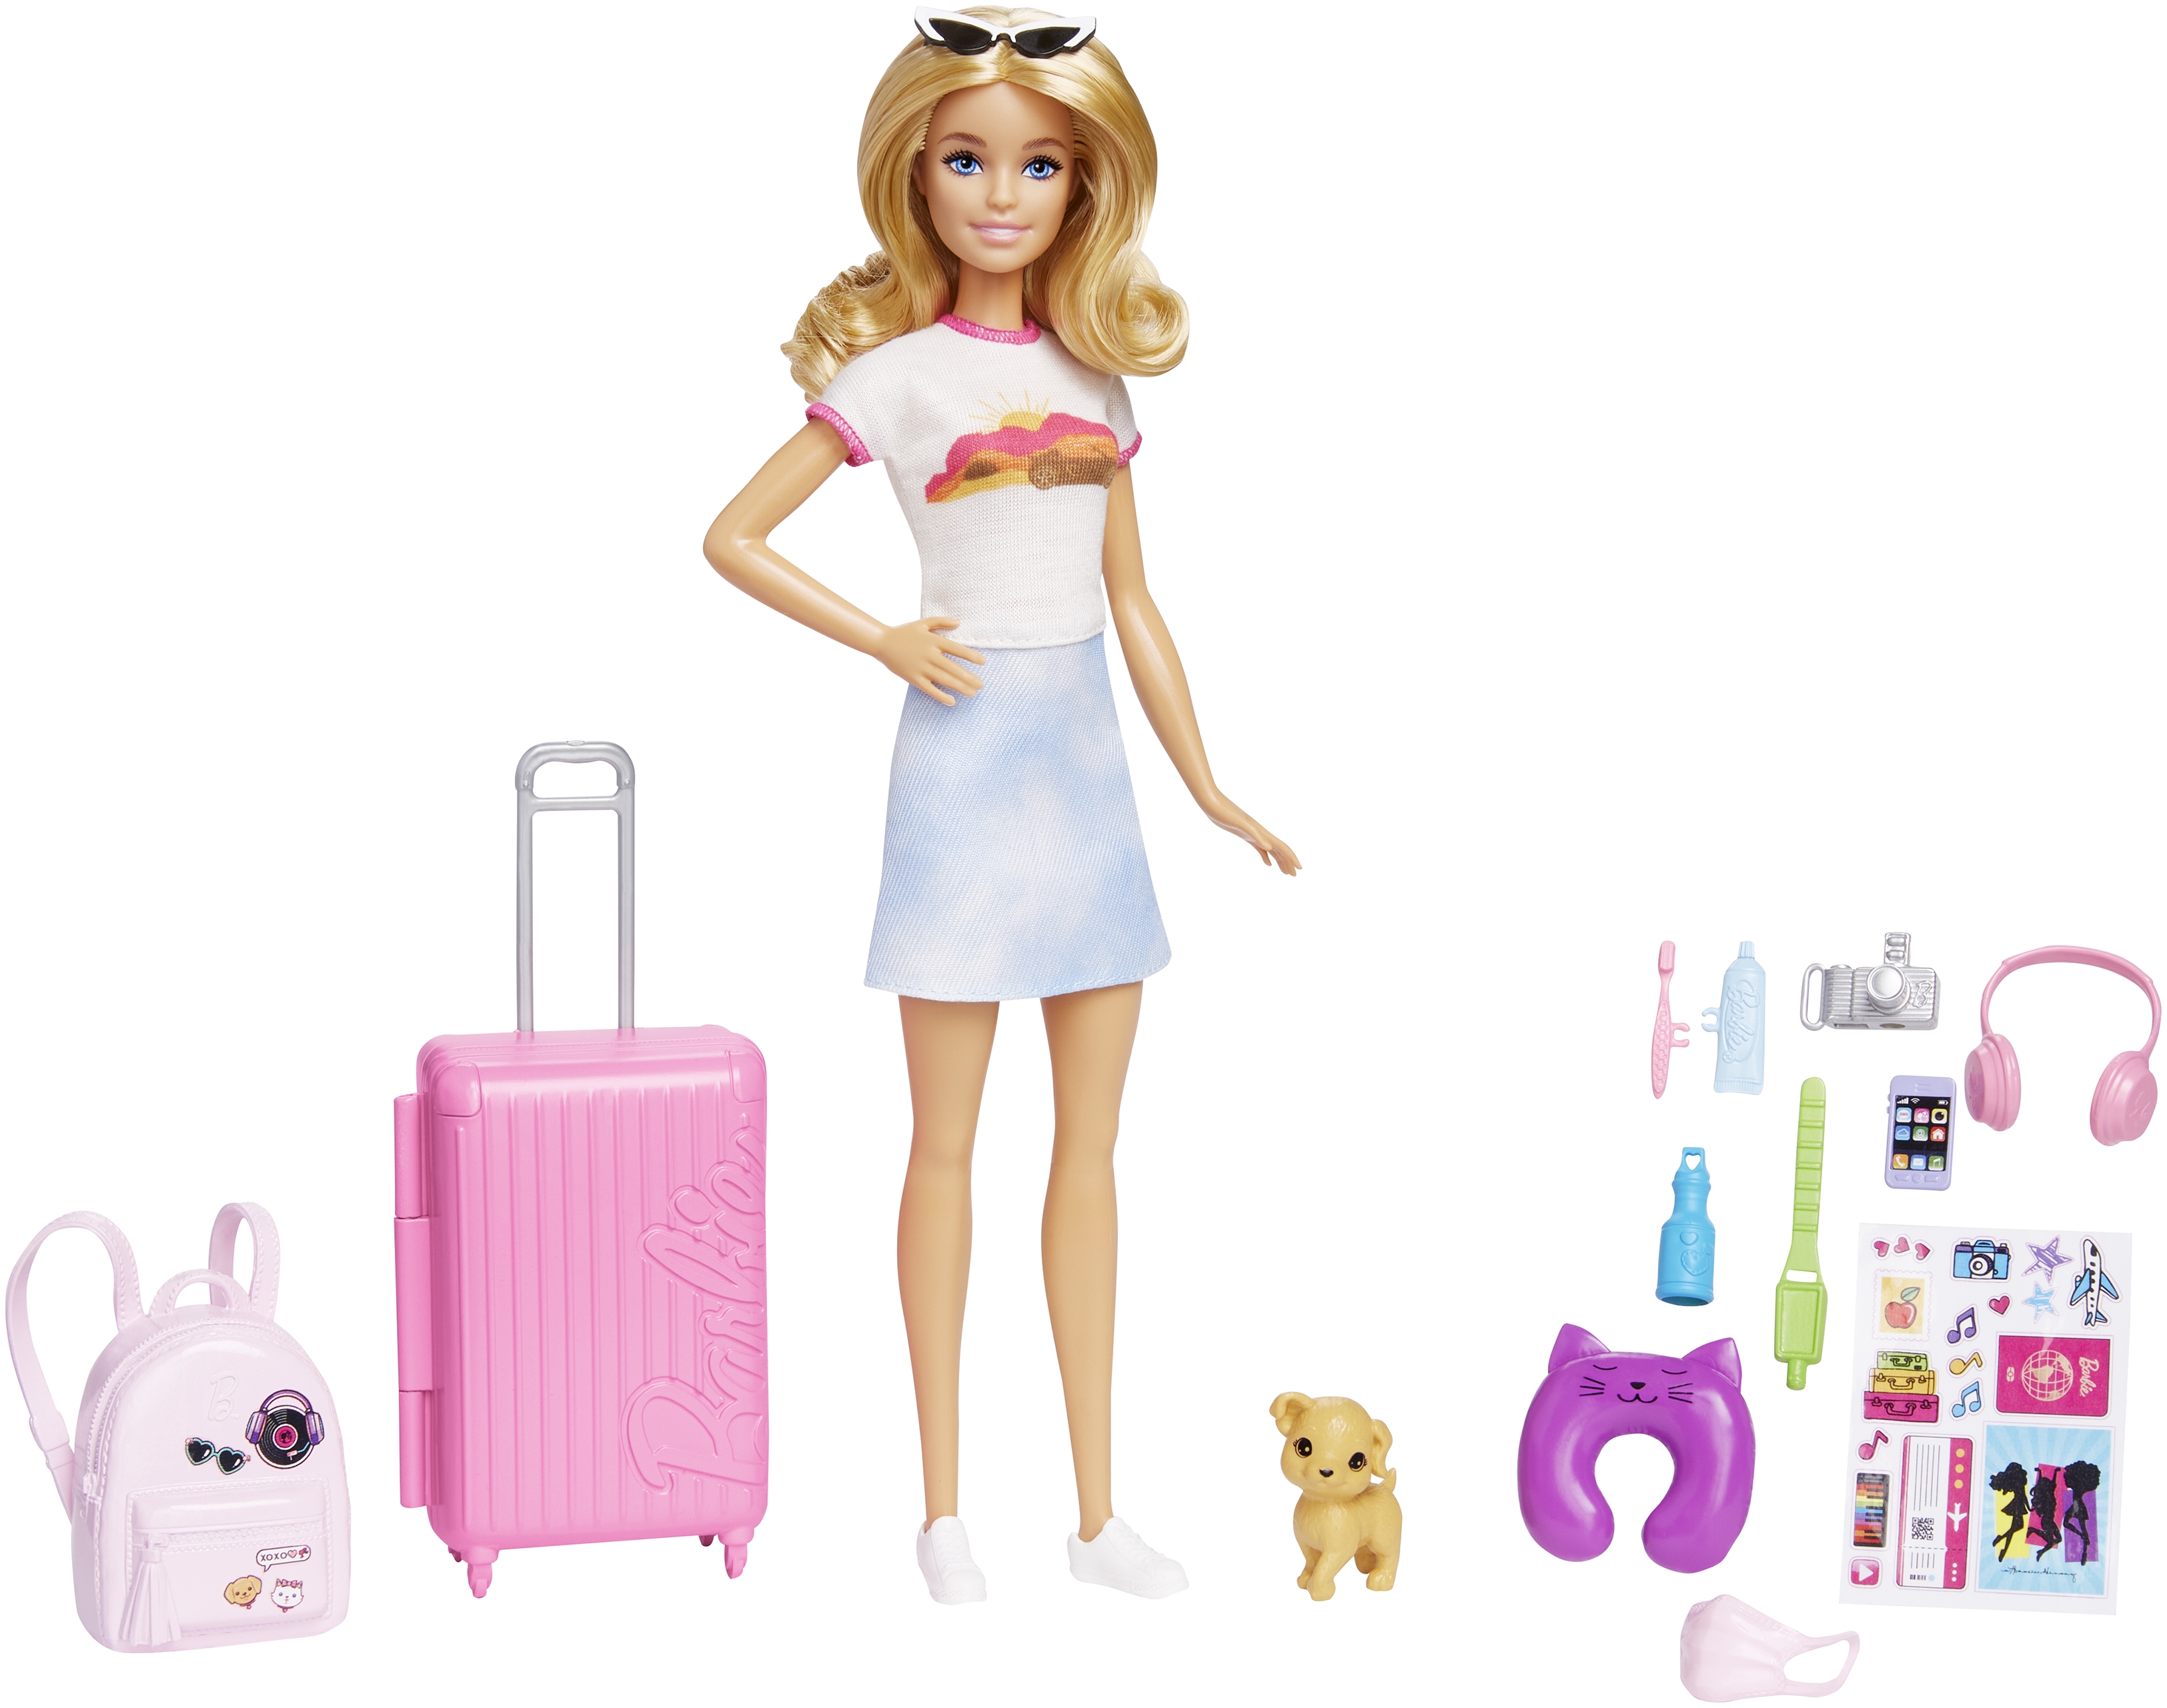 Barbie Travel Doll, Blonde, with Puppy, Opening Suitcase, Stickers and 10+ Accessories, for 3 to 7 Year Olds - wide 4